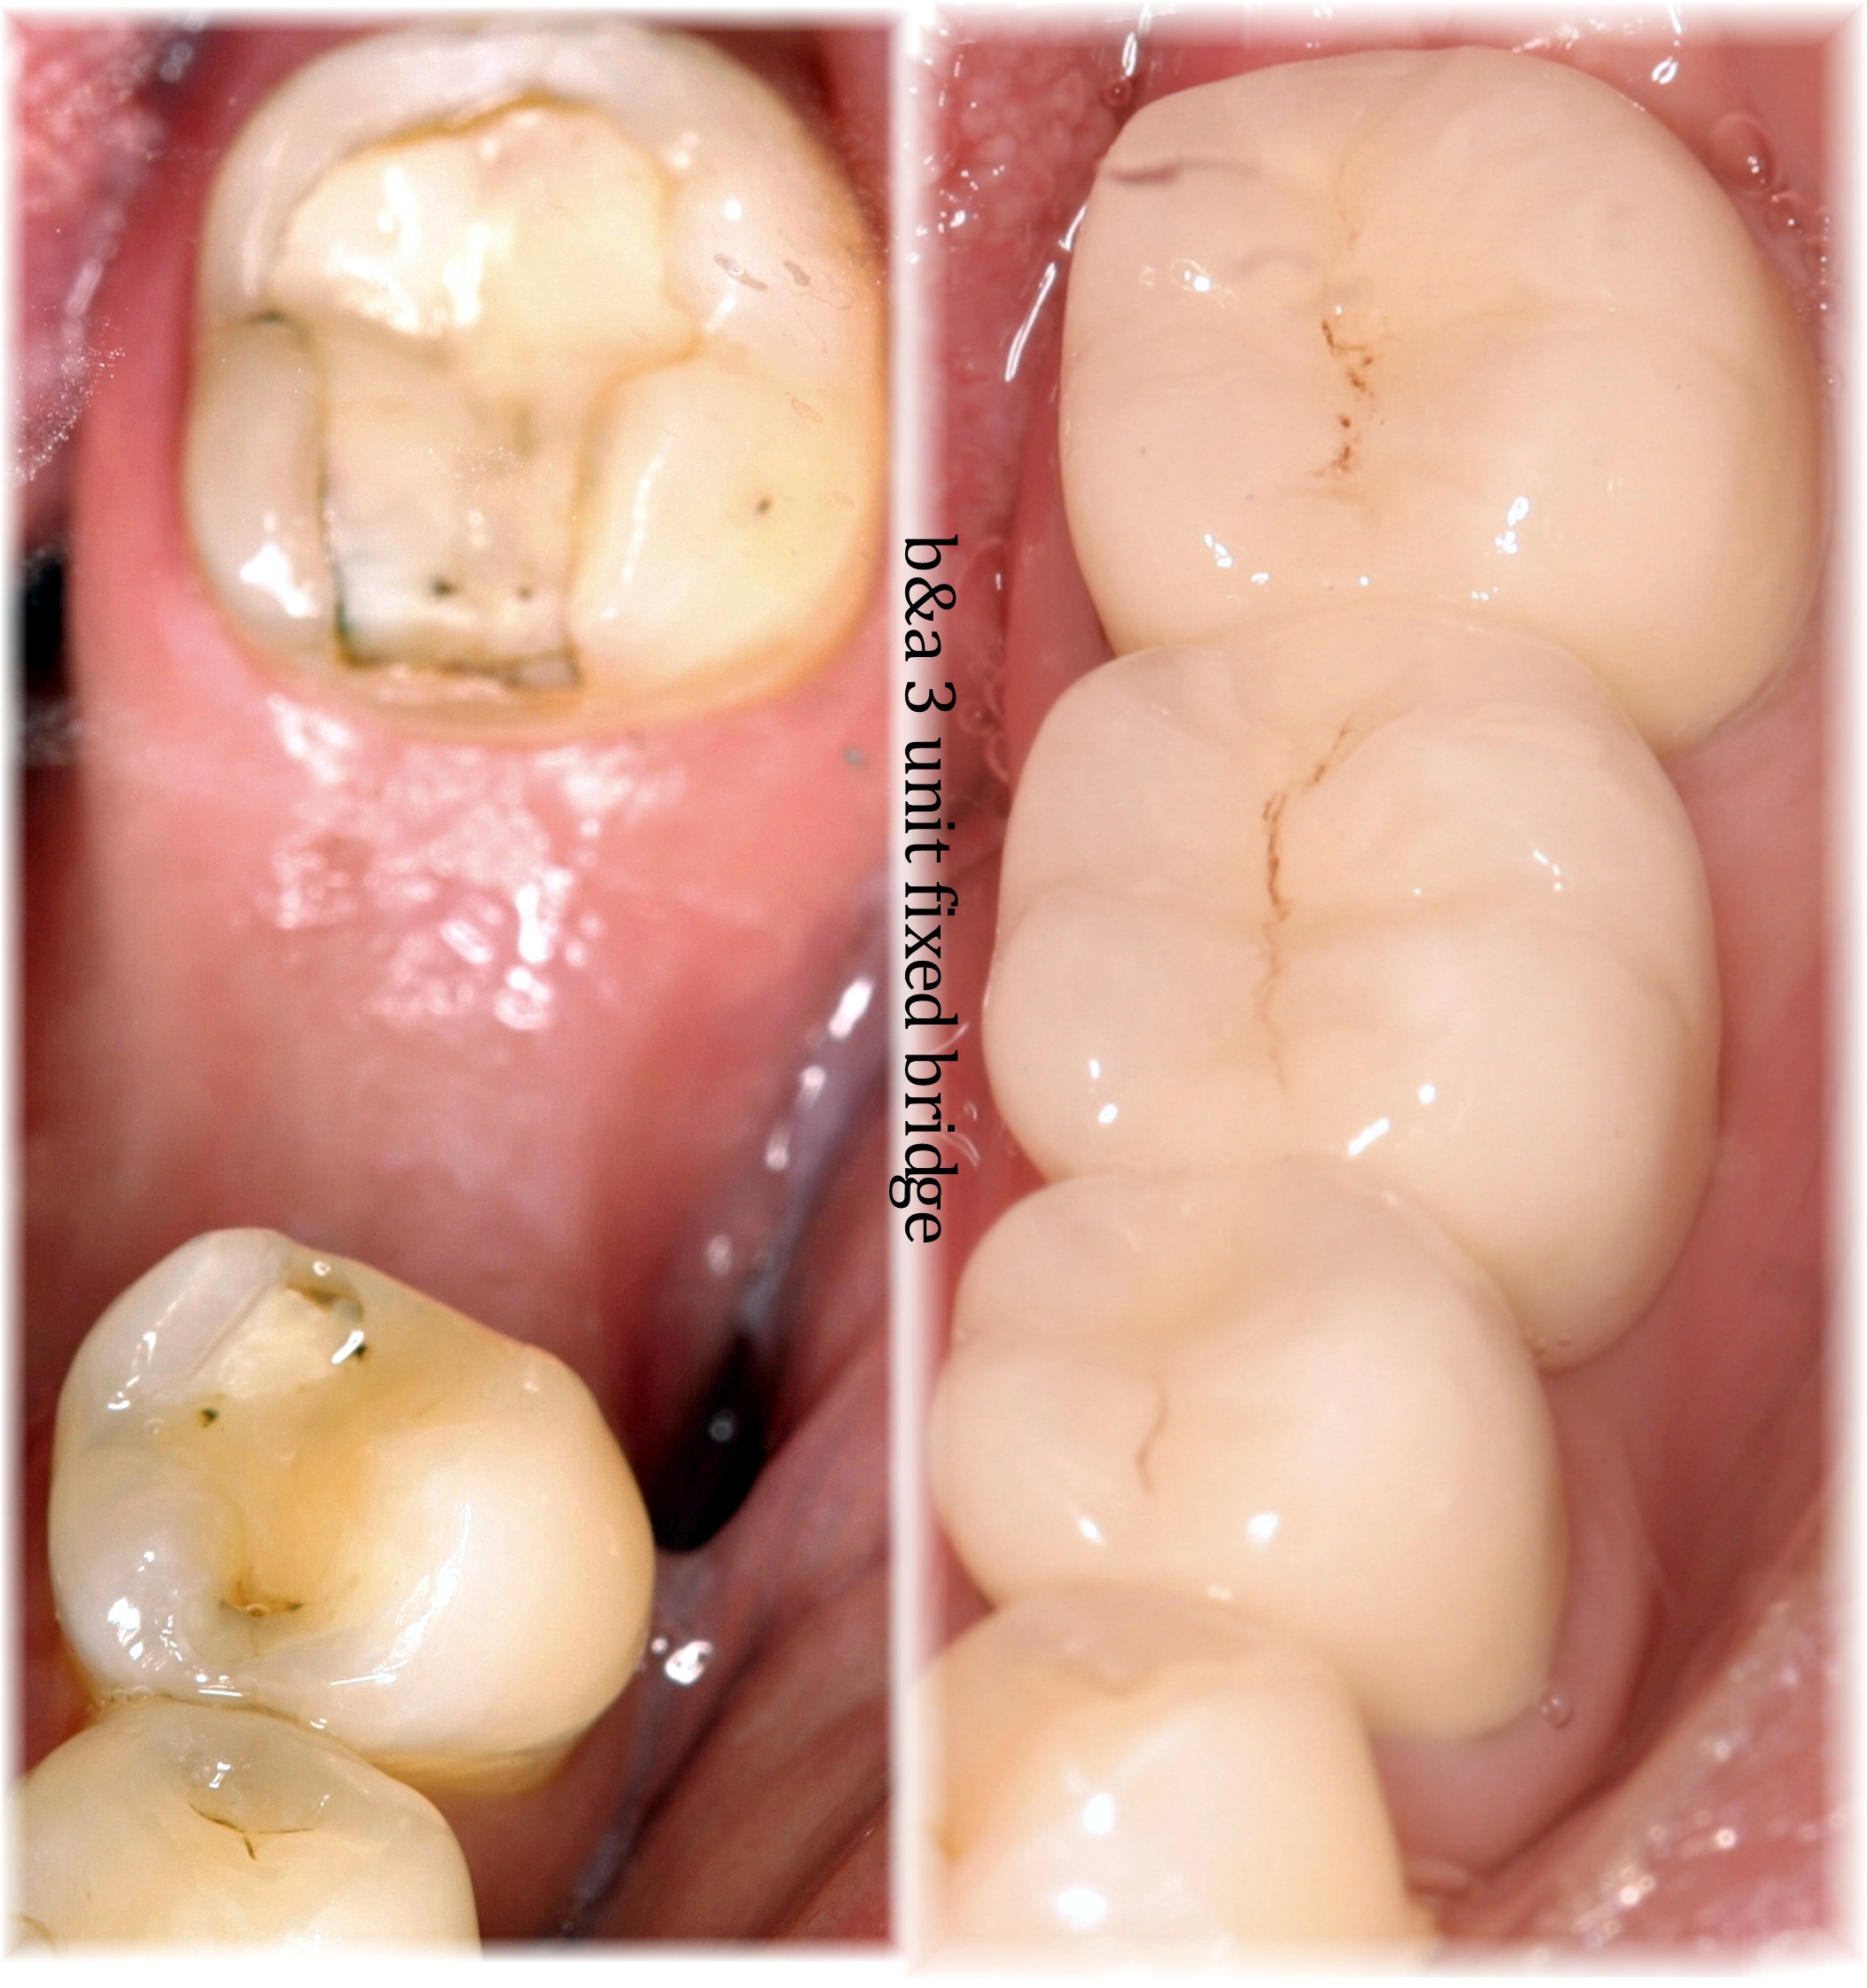 Dr. Randy Johnson's Center for Contemporary Dentistry Photo